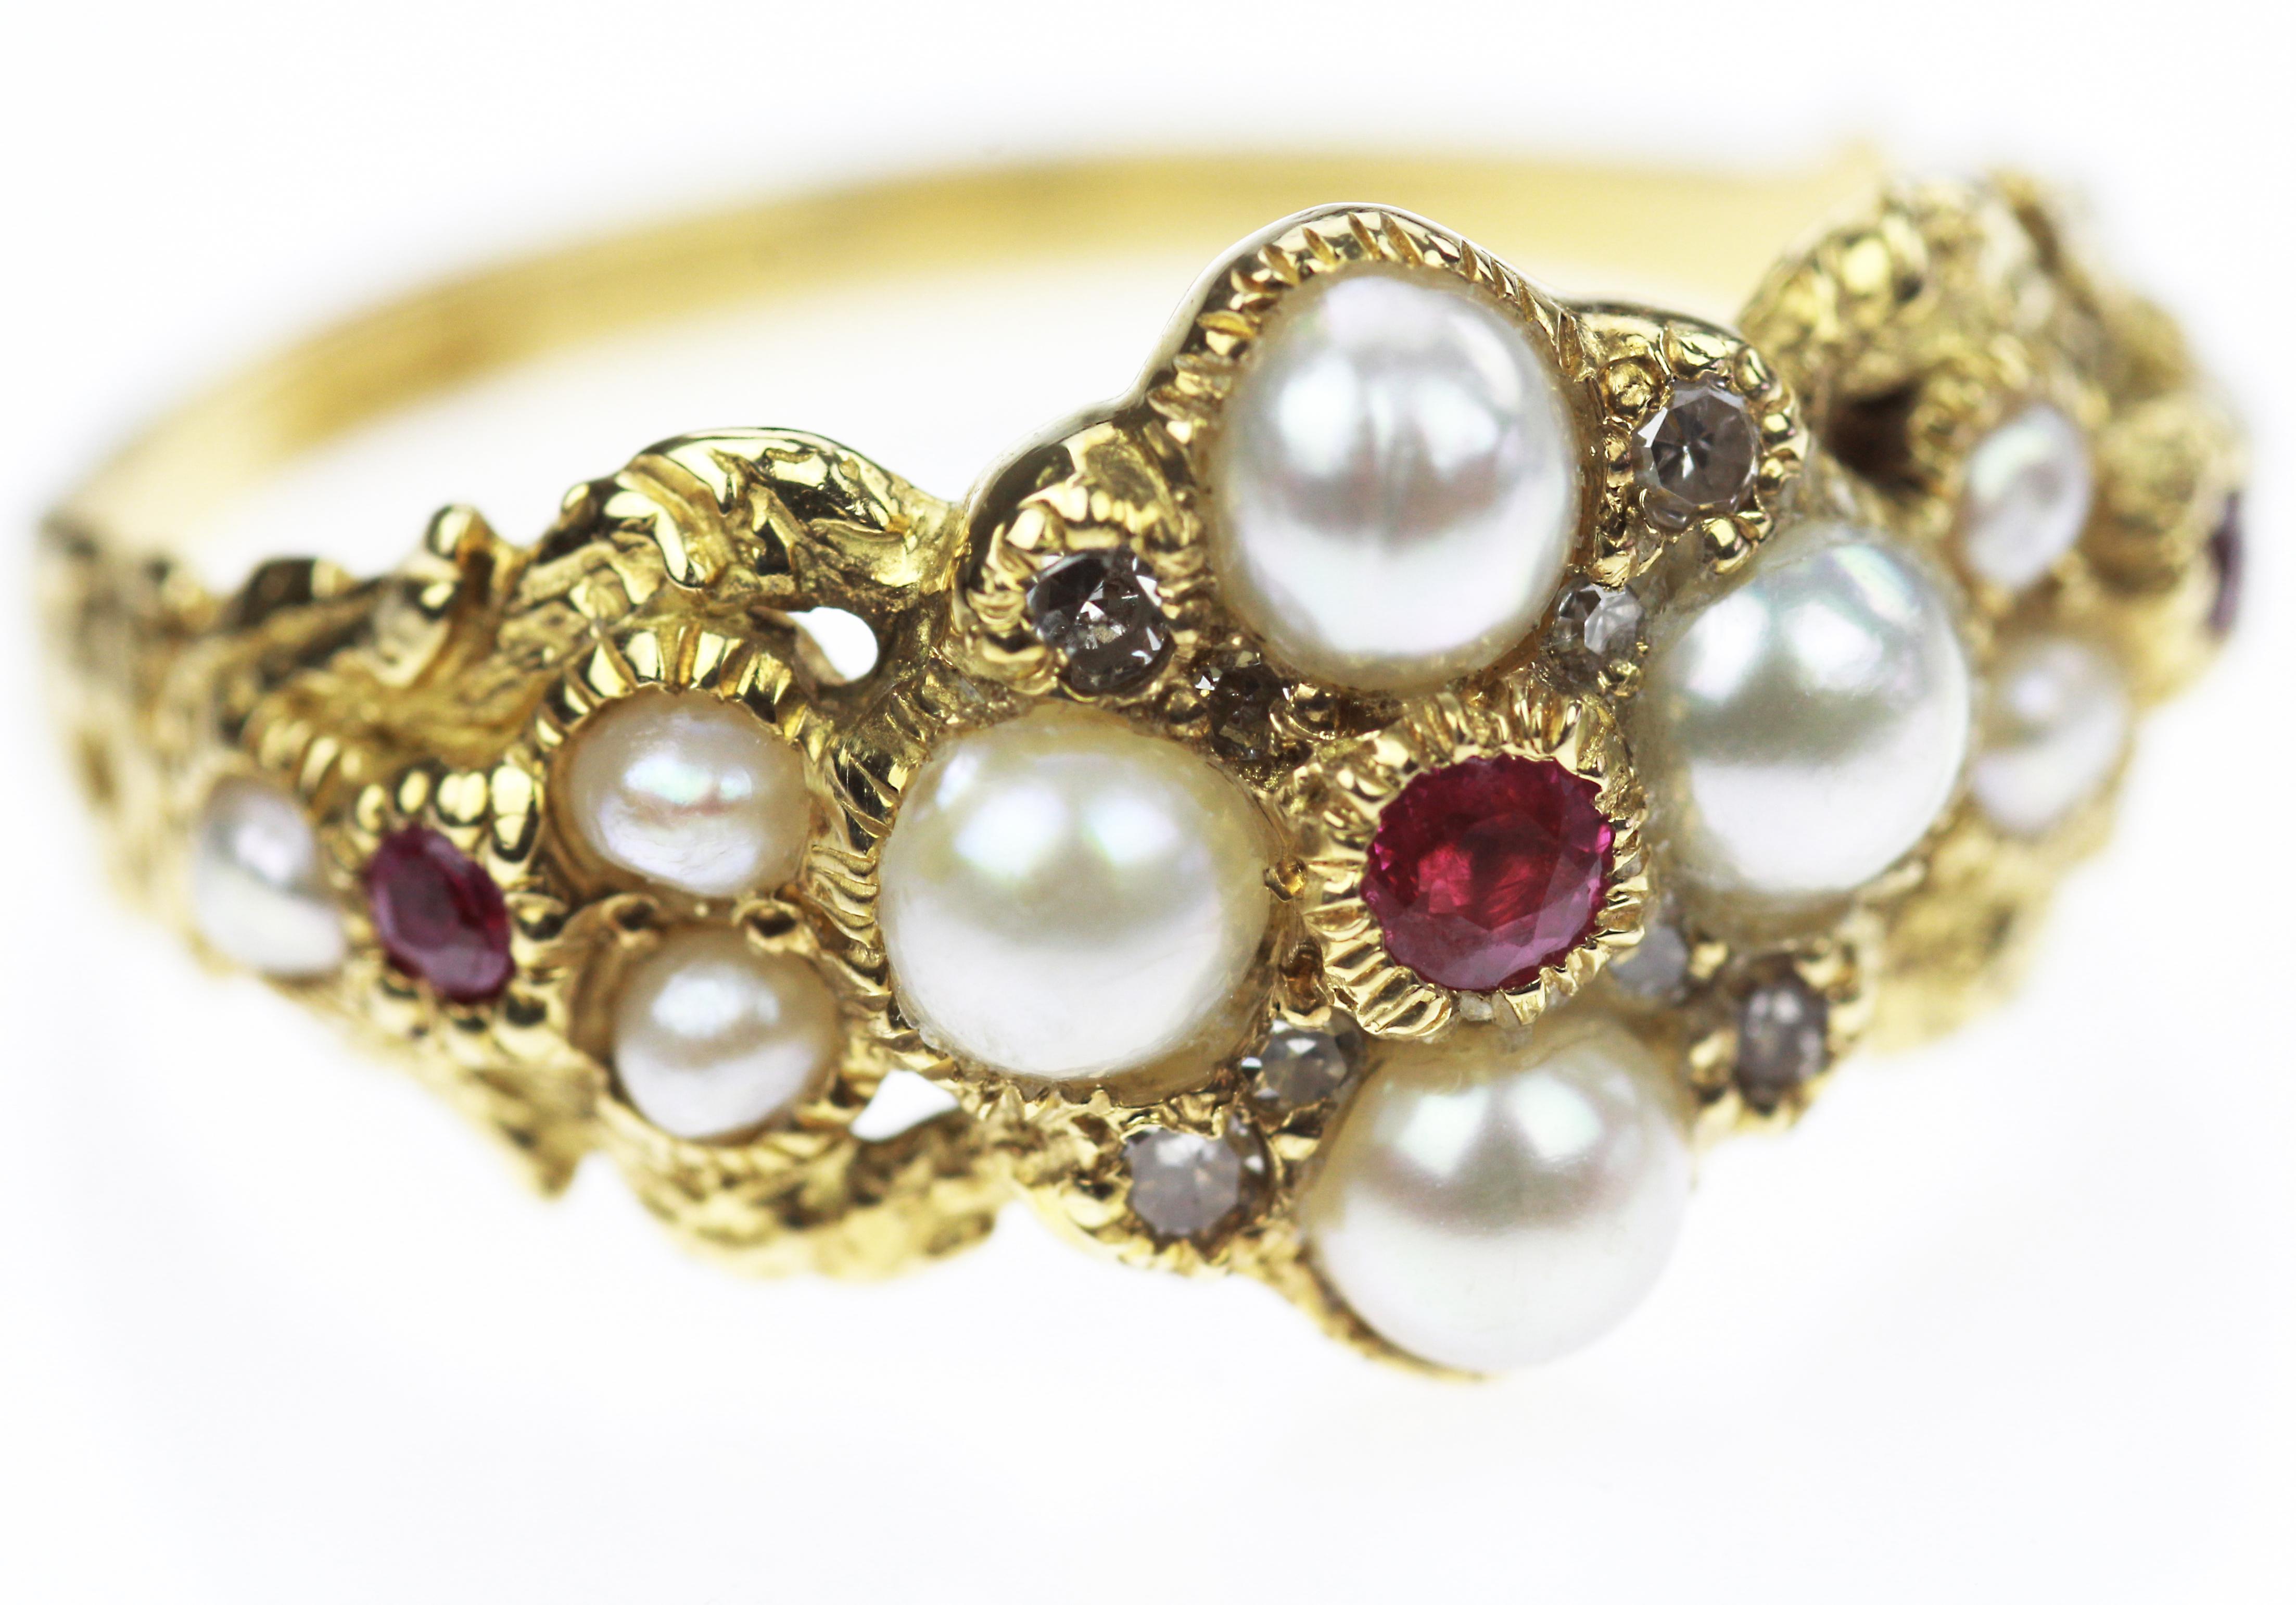 Beautiful pearl, ruby and diamond ring, created with passion to be cherished with love. It is based on a peculiar yellow gold band ring inscribed with intricate patterns. The yellow gold effortlessly glows, is silky smooth and is able to reflect